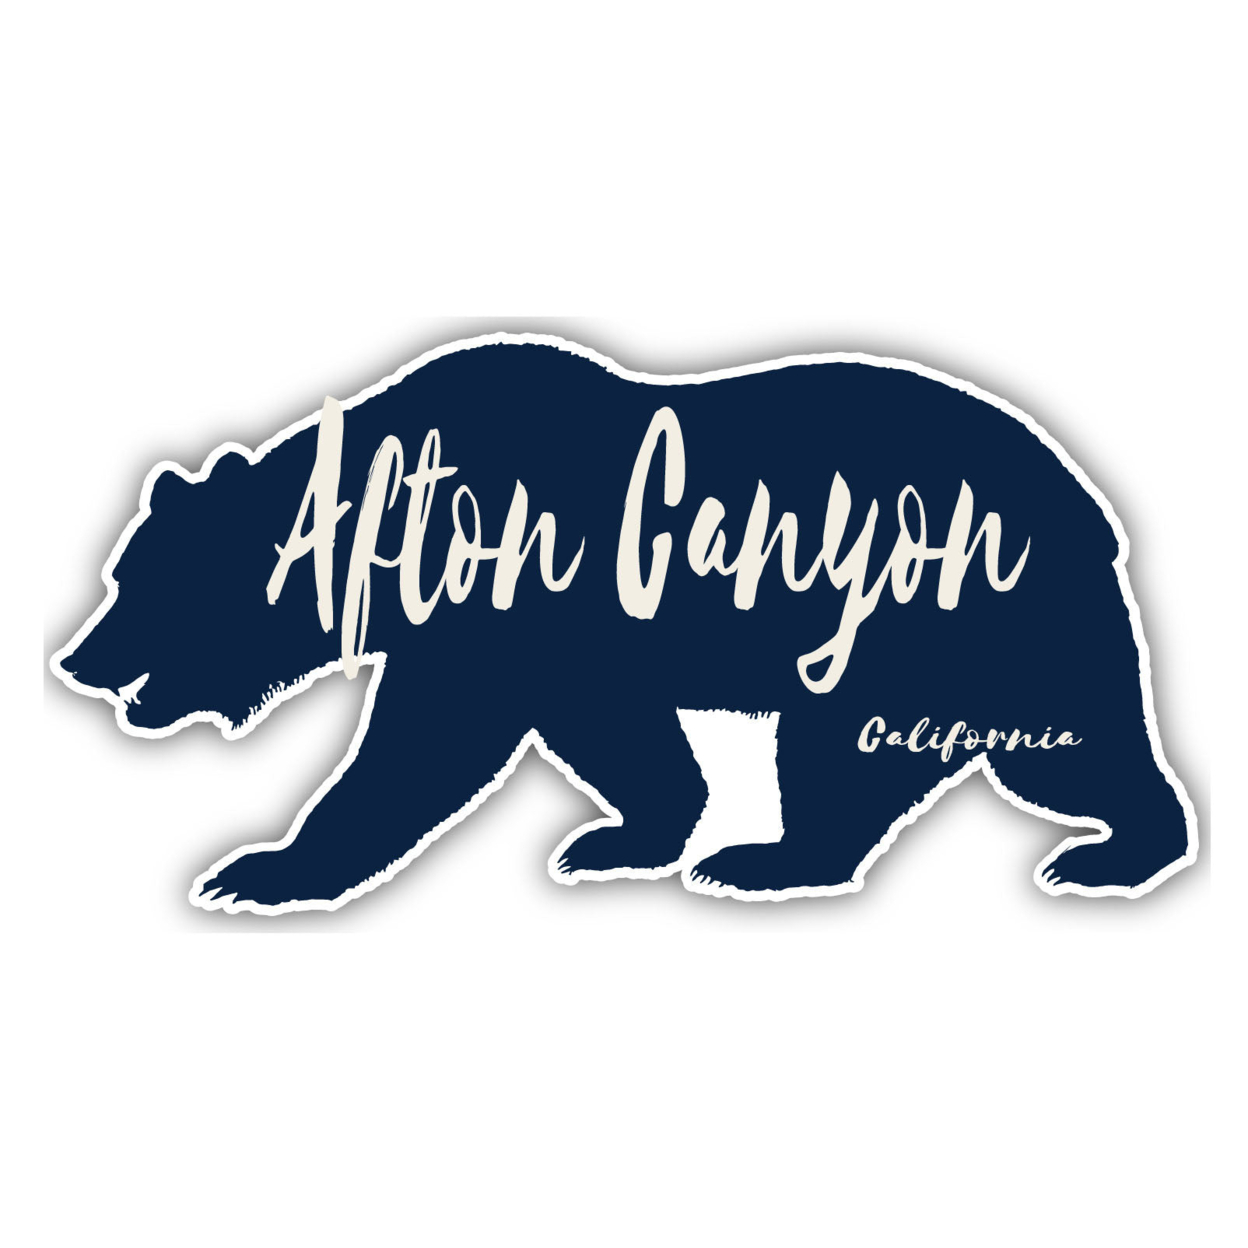 Afton Canyon California Souvenir Decorative Stickers (Choose Theme And Size) - 4-Pack, 6-Inch, Bear